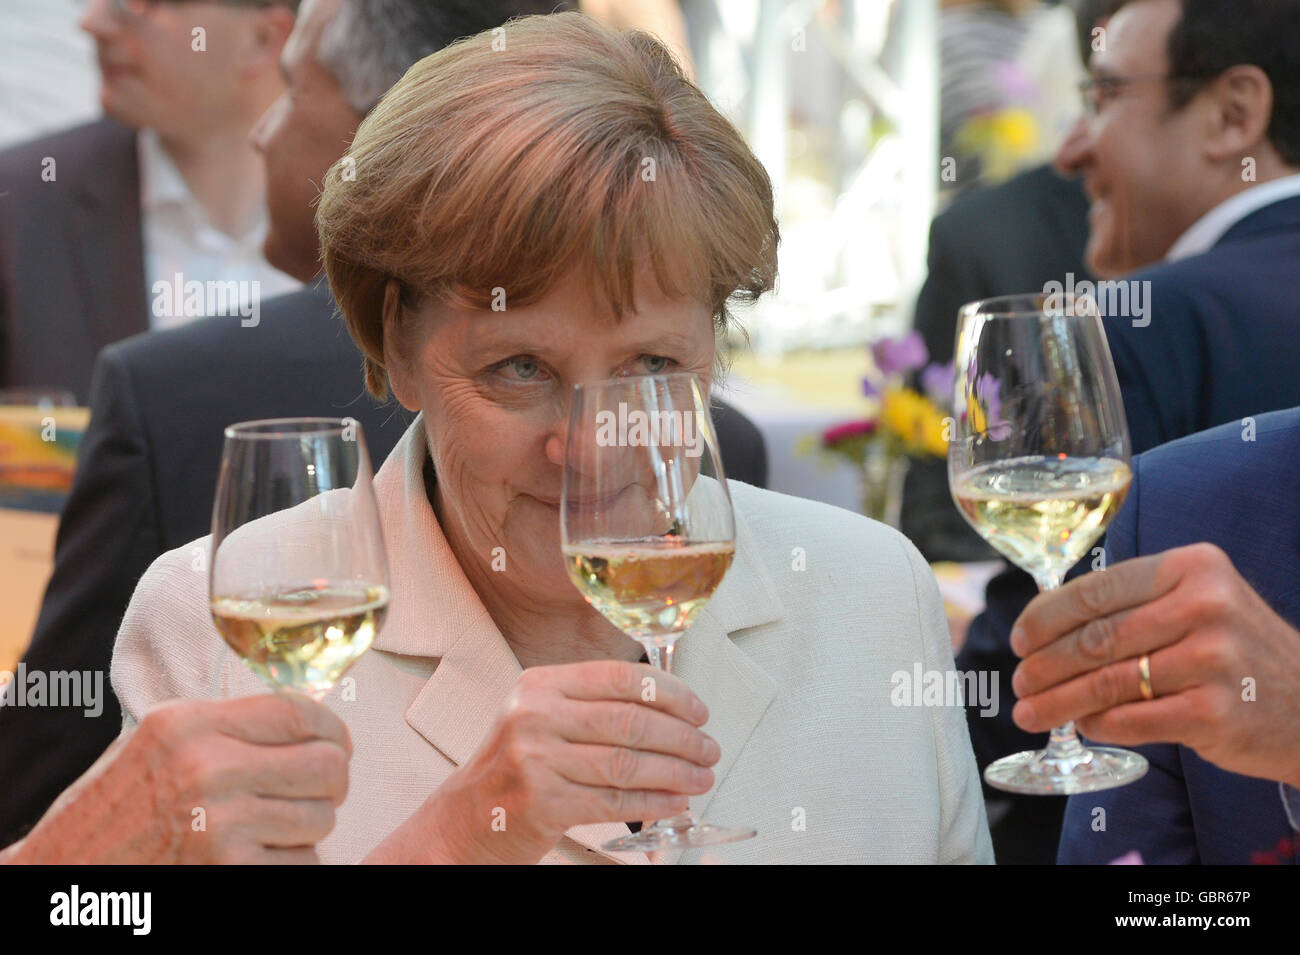 German Chancellor Angela Merkel (CDU) pictured at the Stallwaechterparty of the Baden-Wuerrtemberg state representation, holding a glass of wine, in Berlin, Germany, 7 July 2016. The party traditionally takes place at the start of the parliamentary summer break. PHOTO: MAURIZIO GAMBARINI/DPA Stock Photo